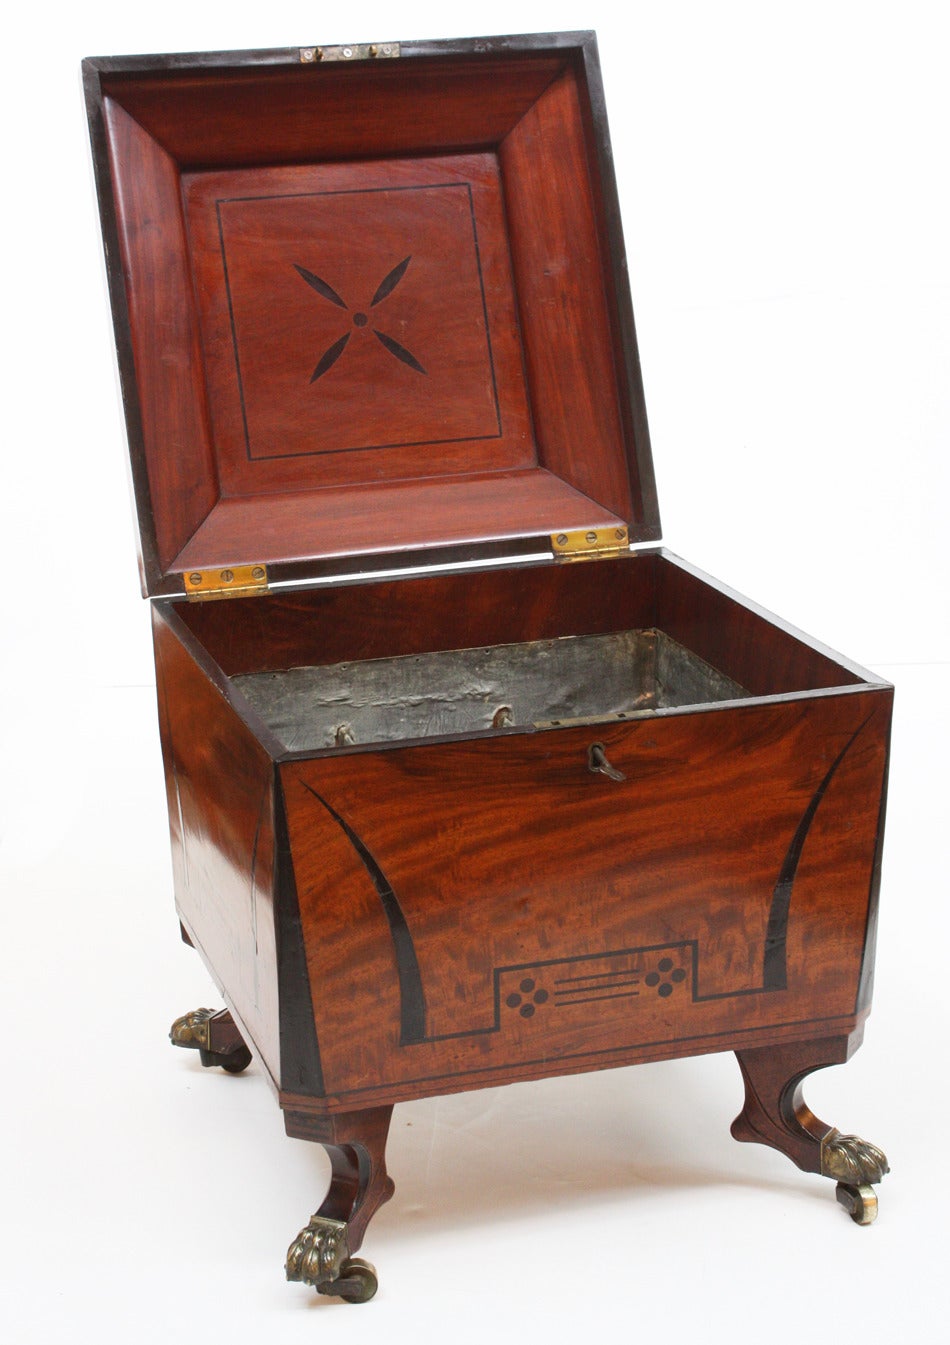 an English Regency cellarette, mahogany with black band on lid, raised center of lid has flame mahogany with stenciled line and dot matrix, as does body, the whole stands on feet with brass paw shoes and castors, with fitted interior